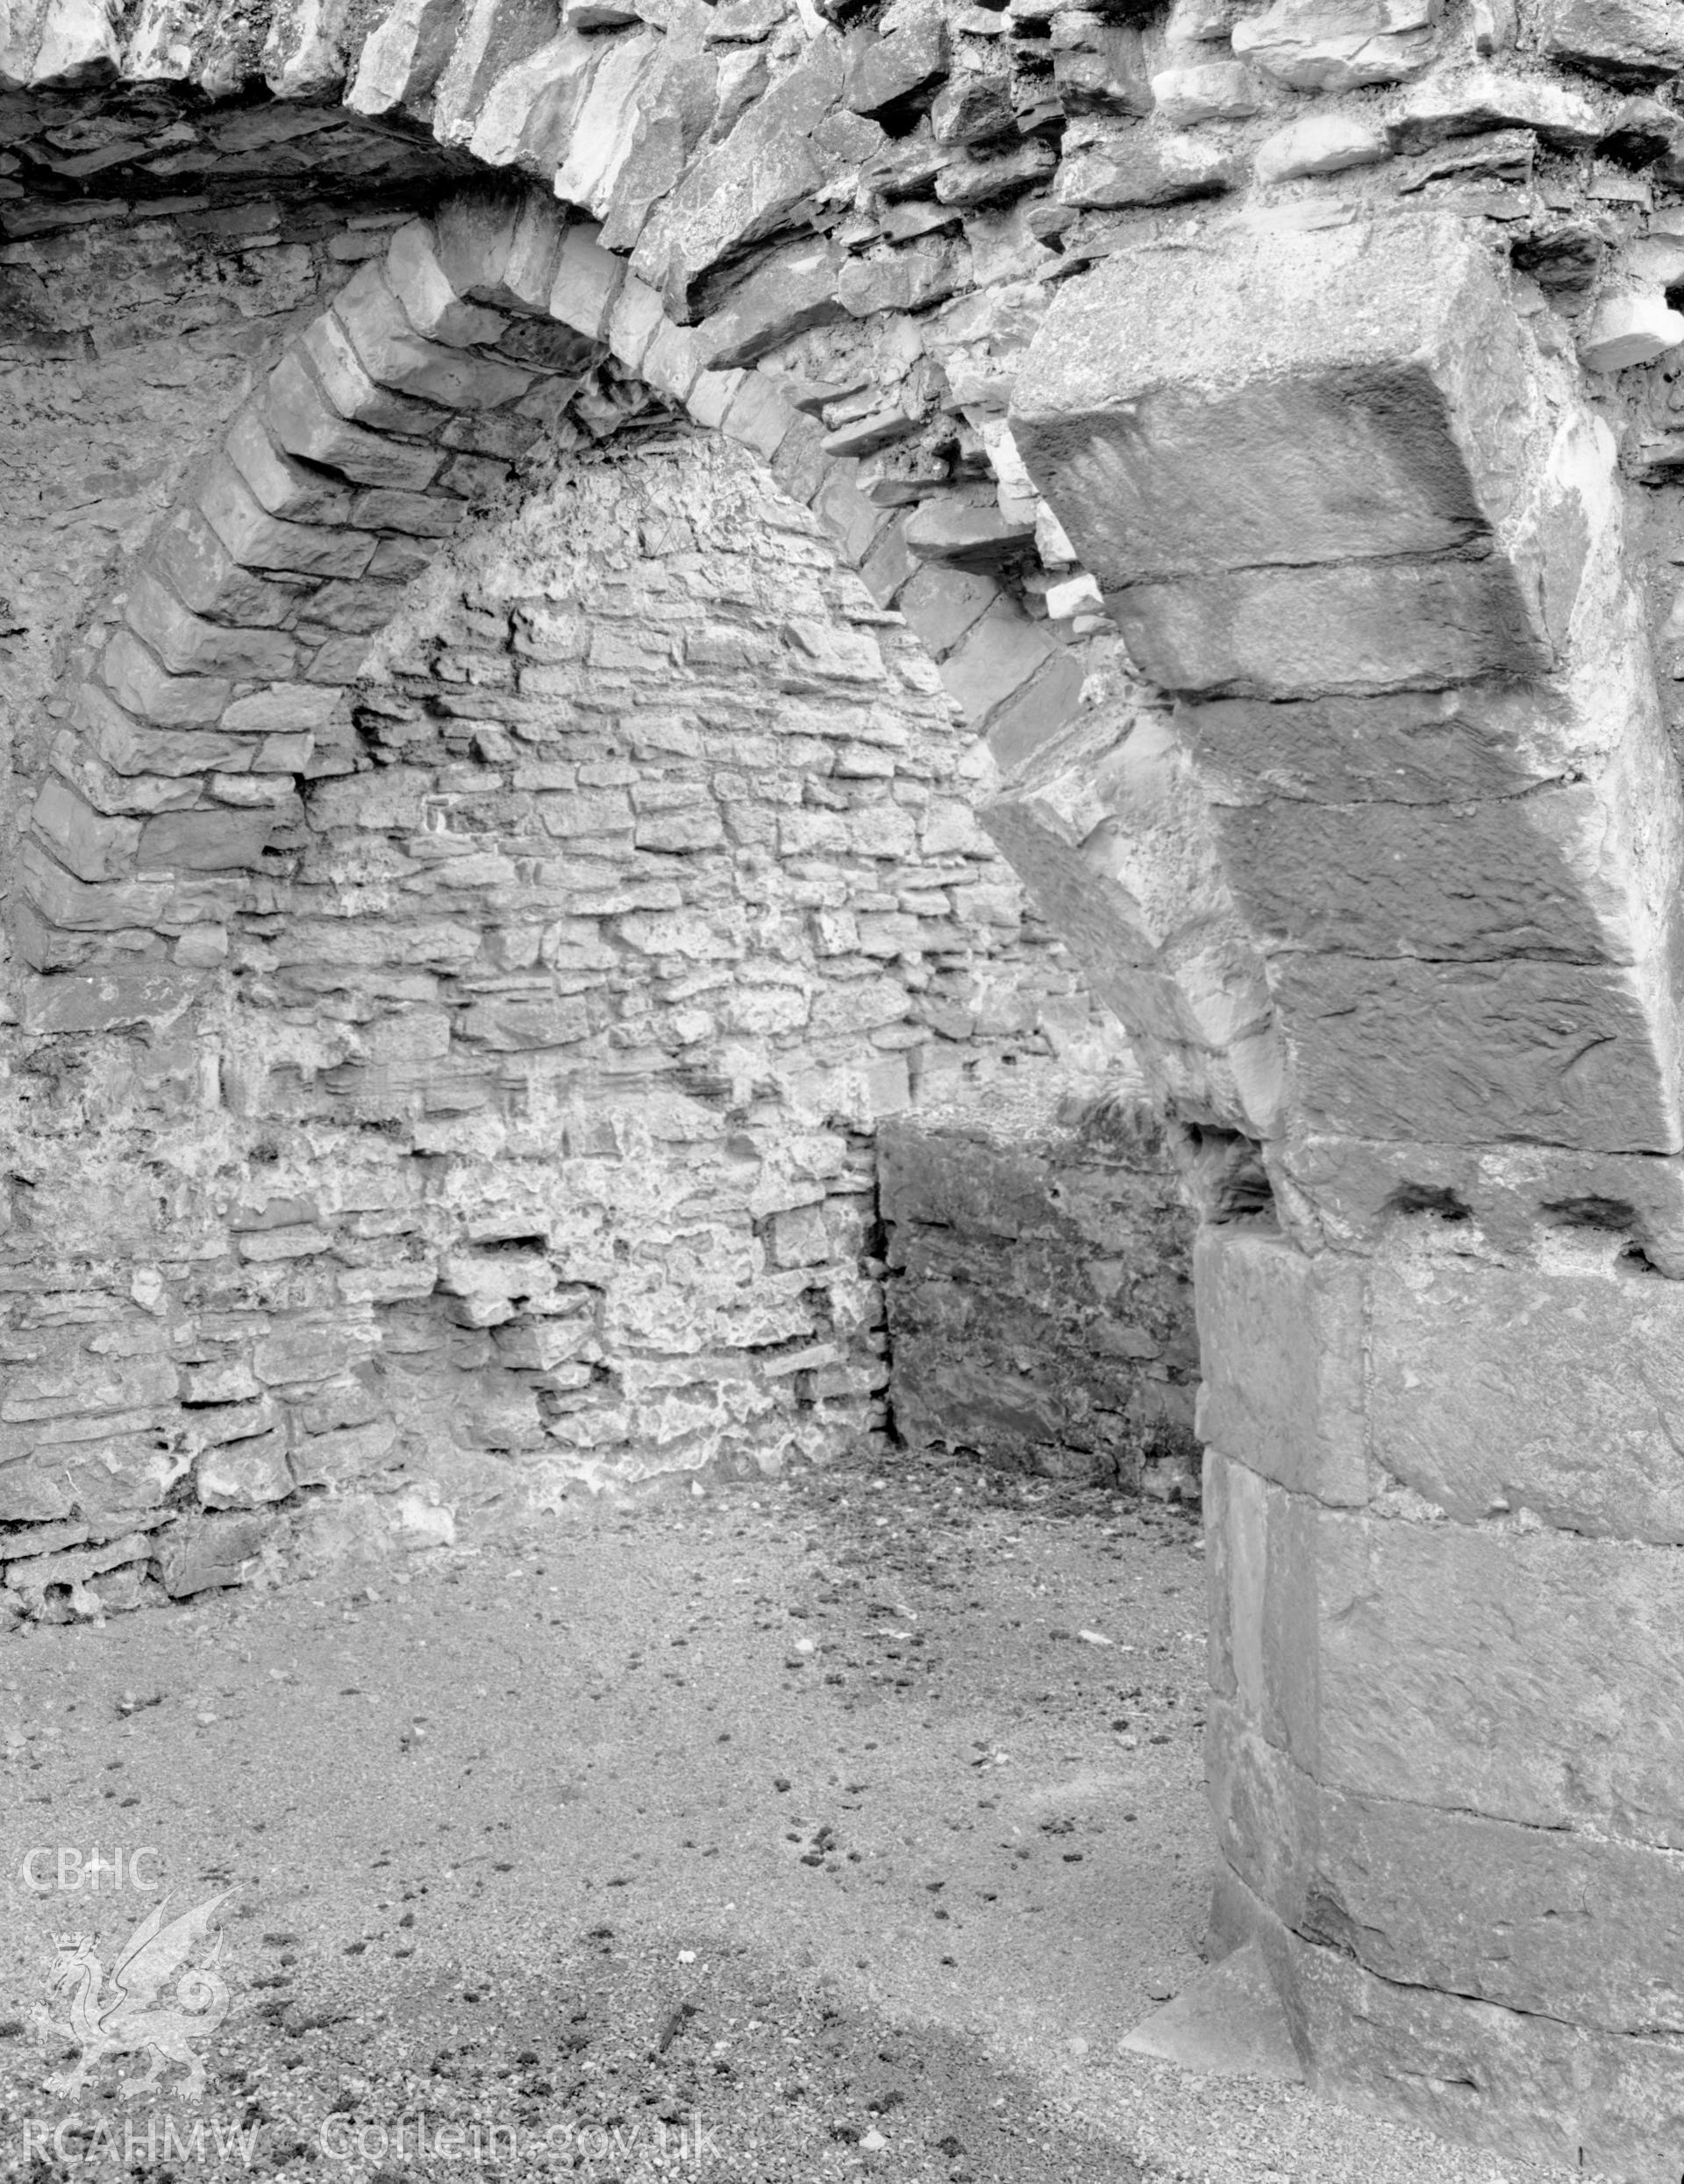 View of vaulted roof at Coity Castle, Coity Higher taken 09.04.65.